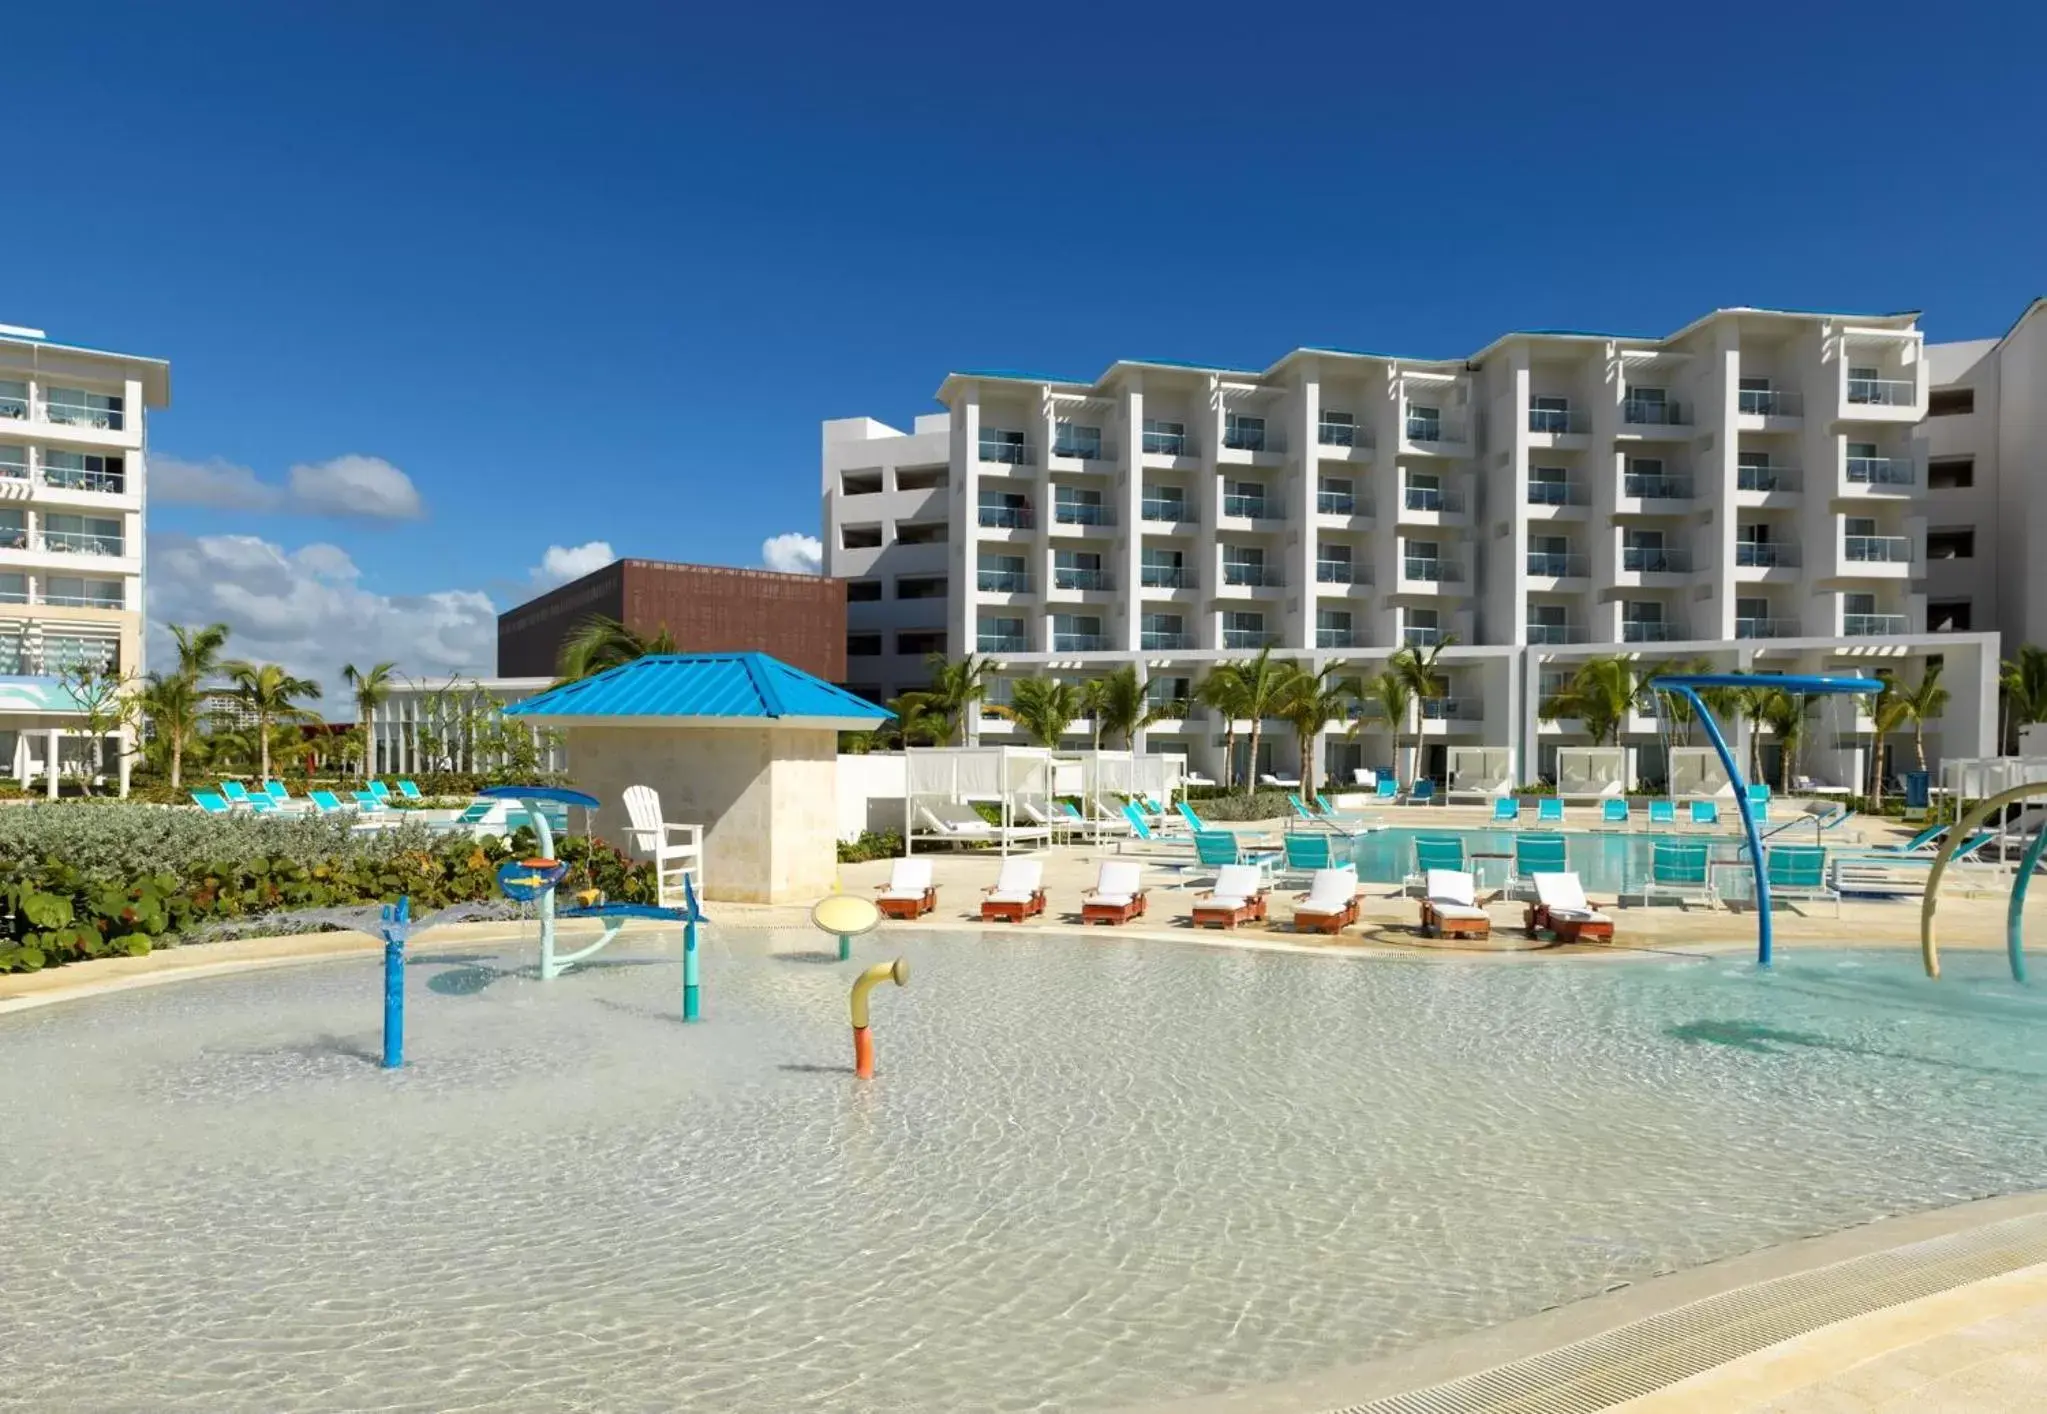 Children play ground, Property Building in Margaritaville Beach Resort Cap Cana Wave - An All-Inclusive Experience for All